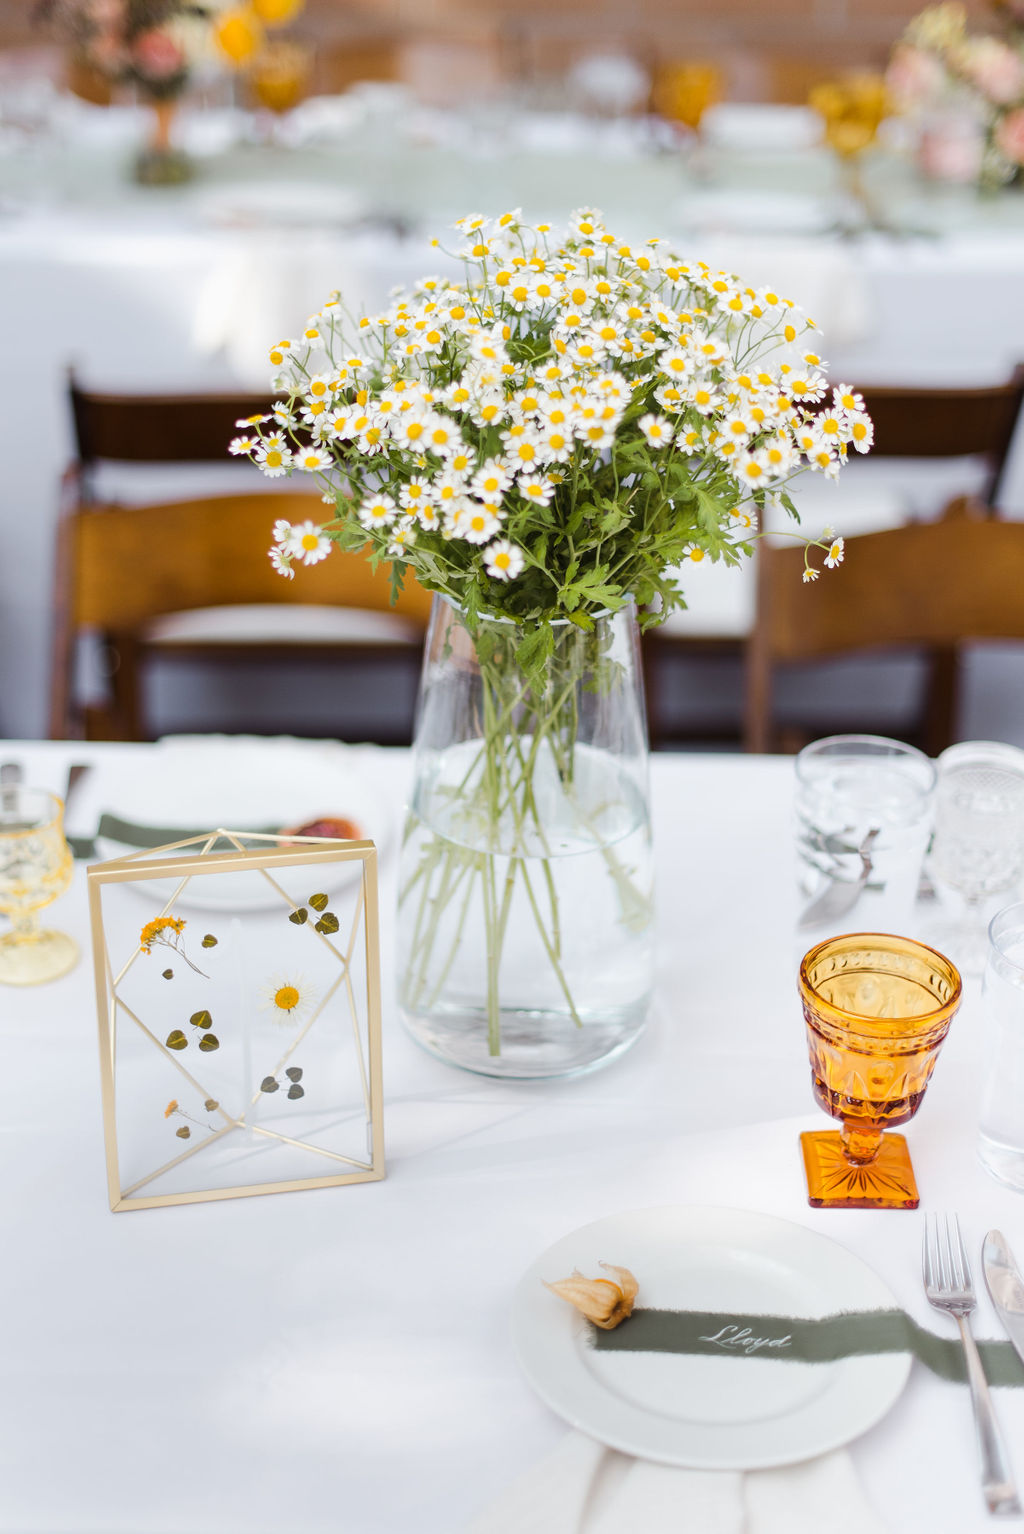 Miniature daisies and whimsical wedding flowers photographed for a whimsical flower wedding and amber glass goblets